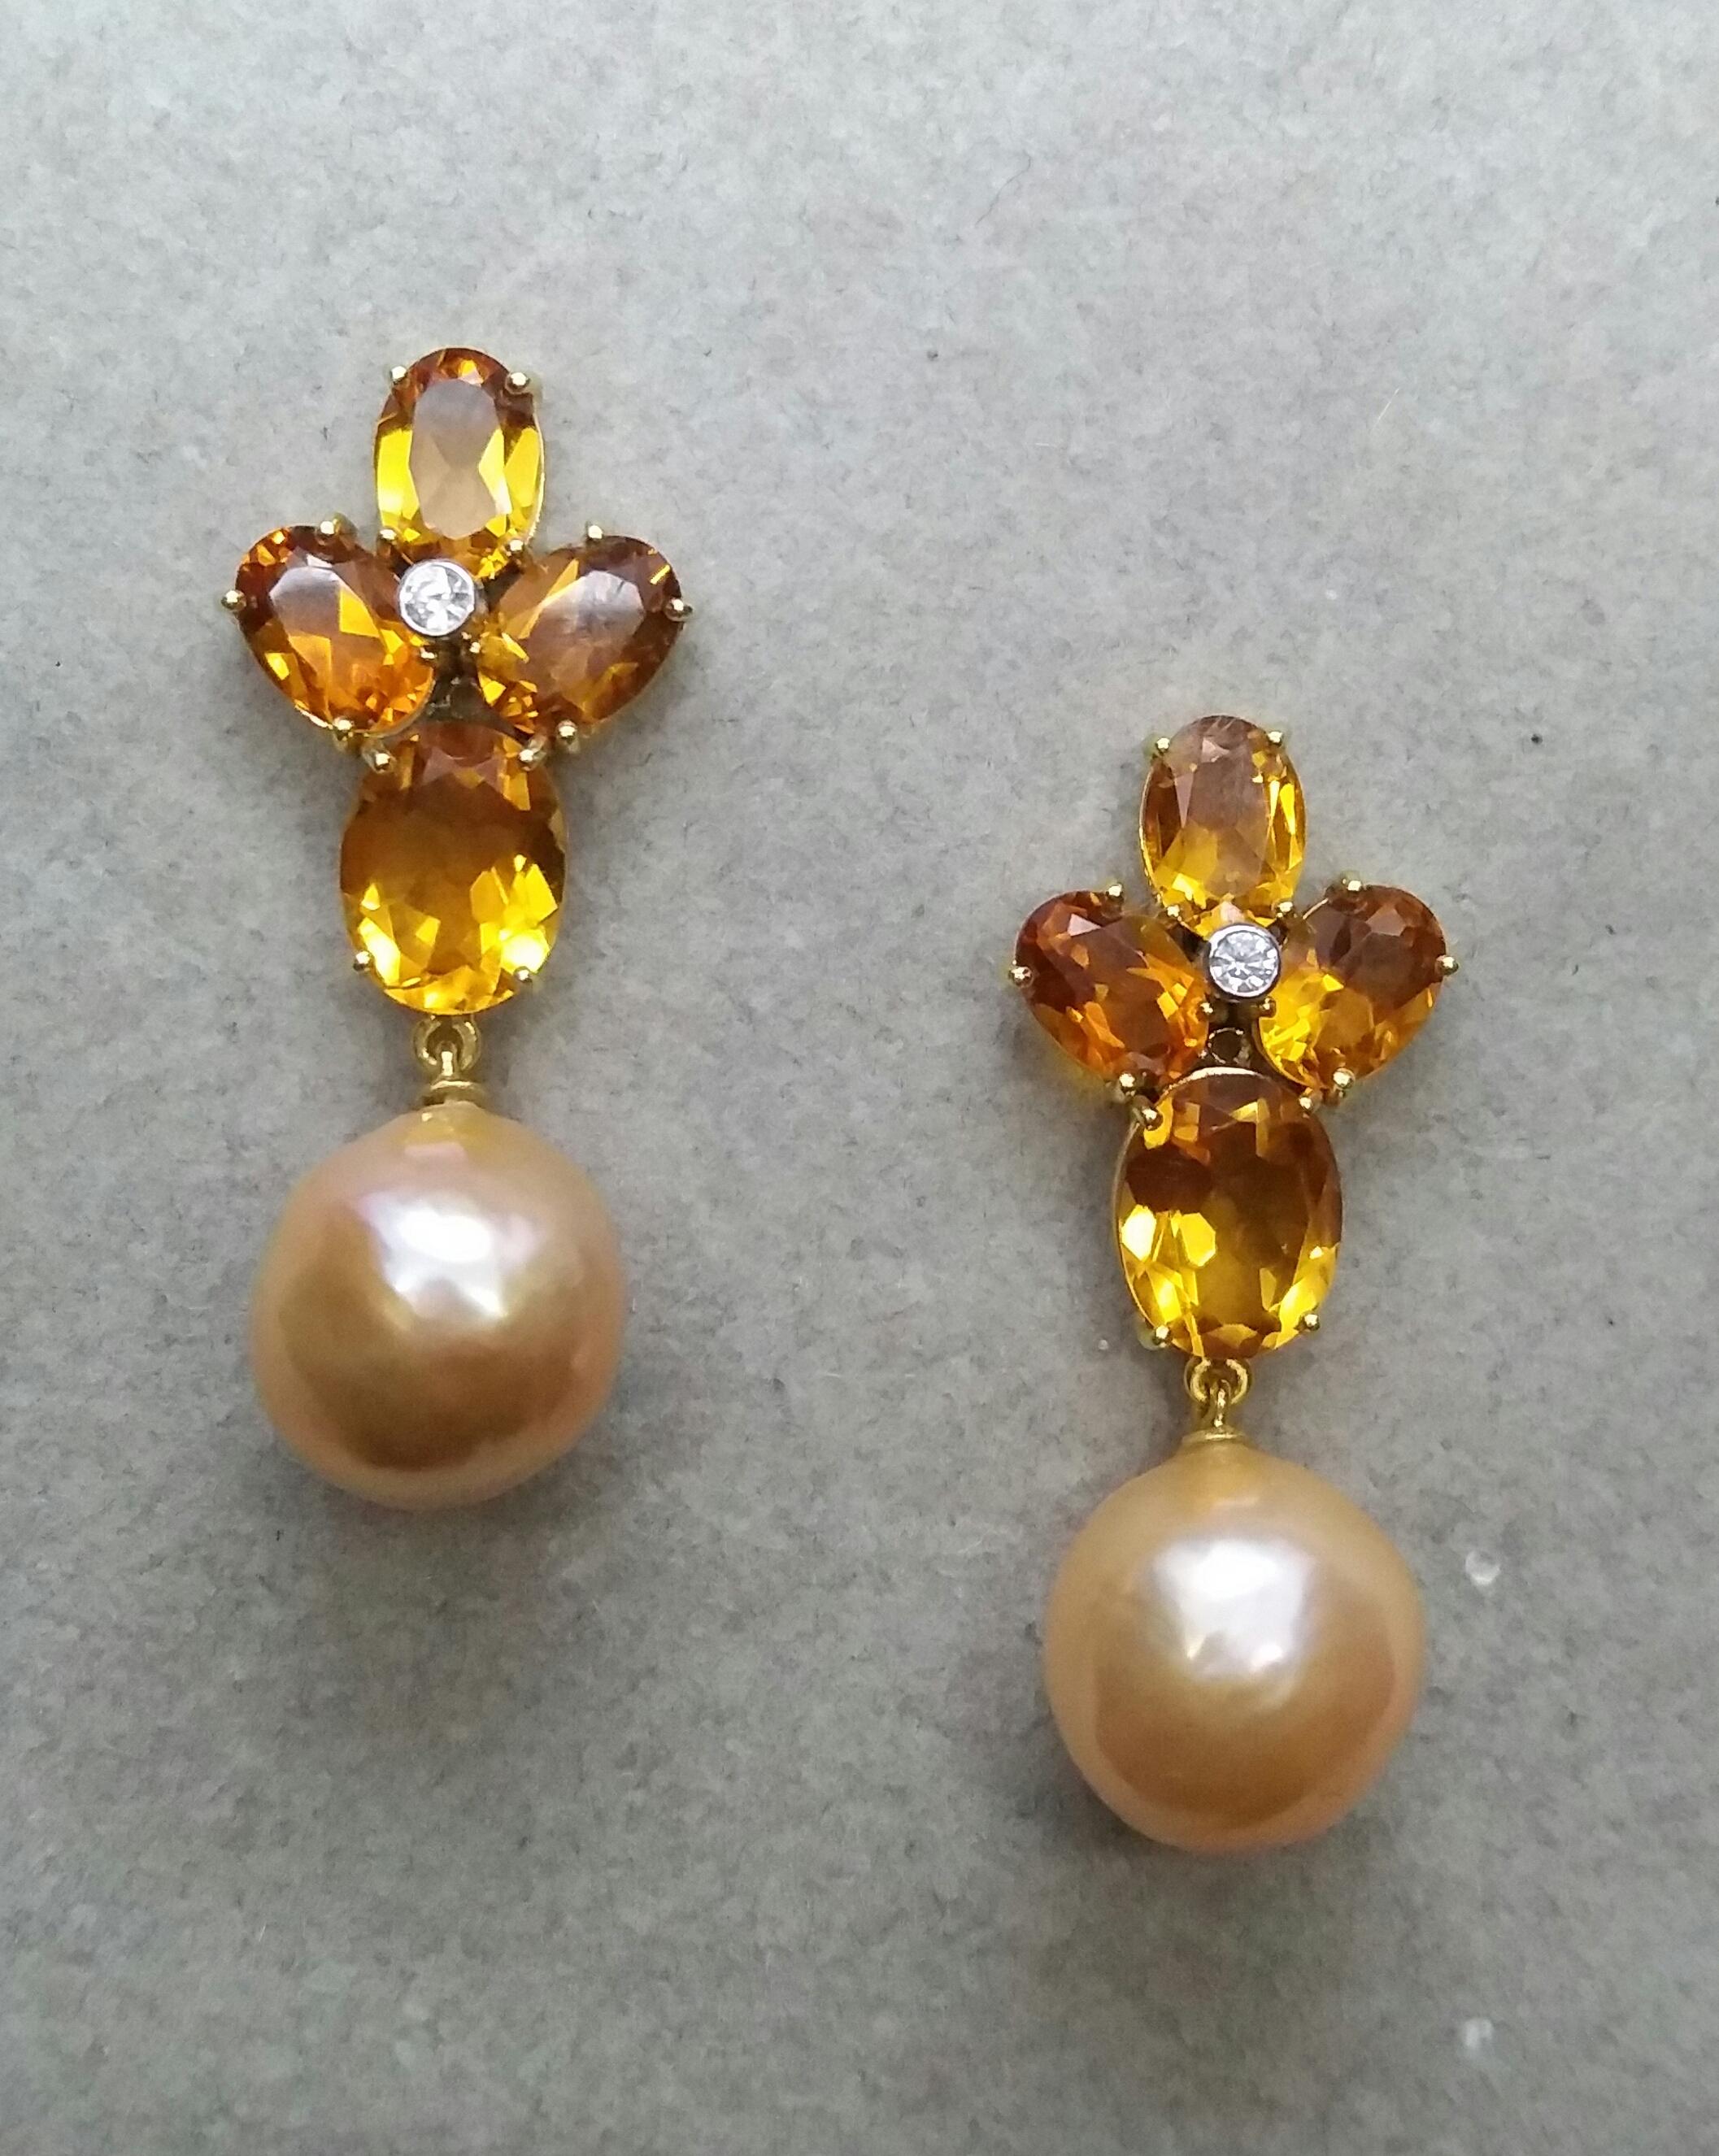 Elegant and completely handmade Earrings consisting of an upper part of 4 oval shape citrins set together in 14 Kt yellow gold with a small diamond in the center, at the bottom 2 Natural Cream Color Baroque Pearls measuring 11 mm. in diameter.
In